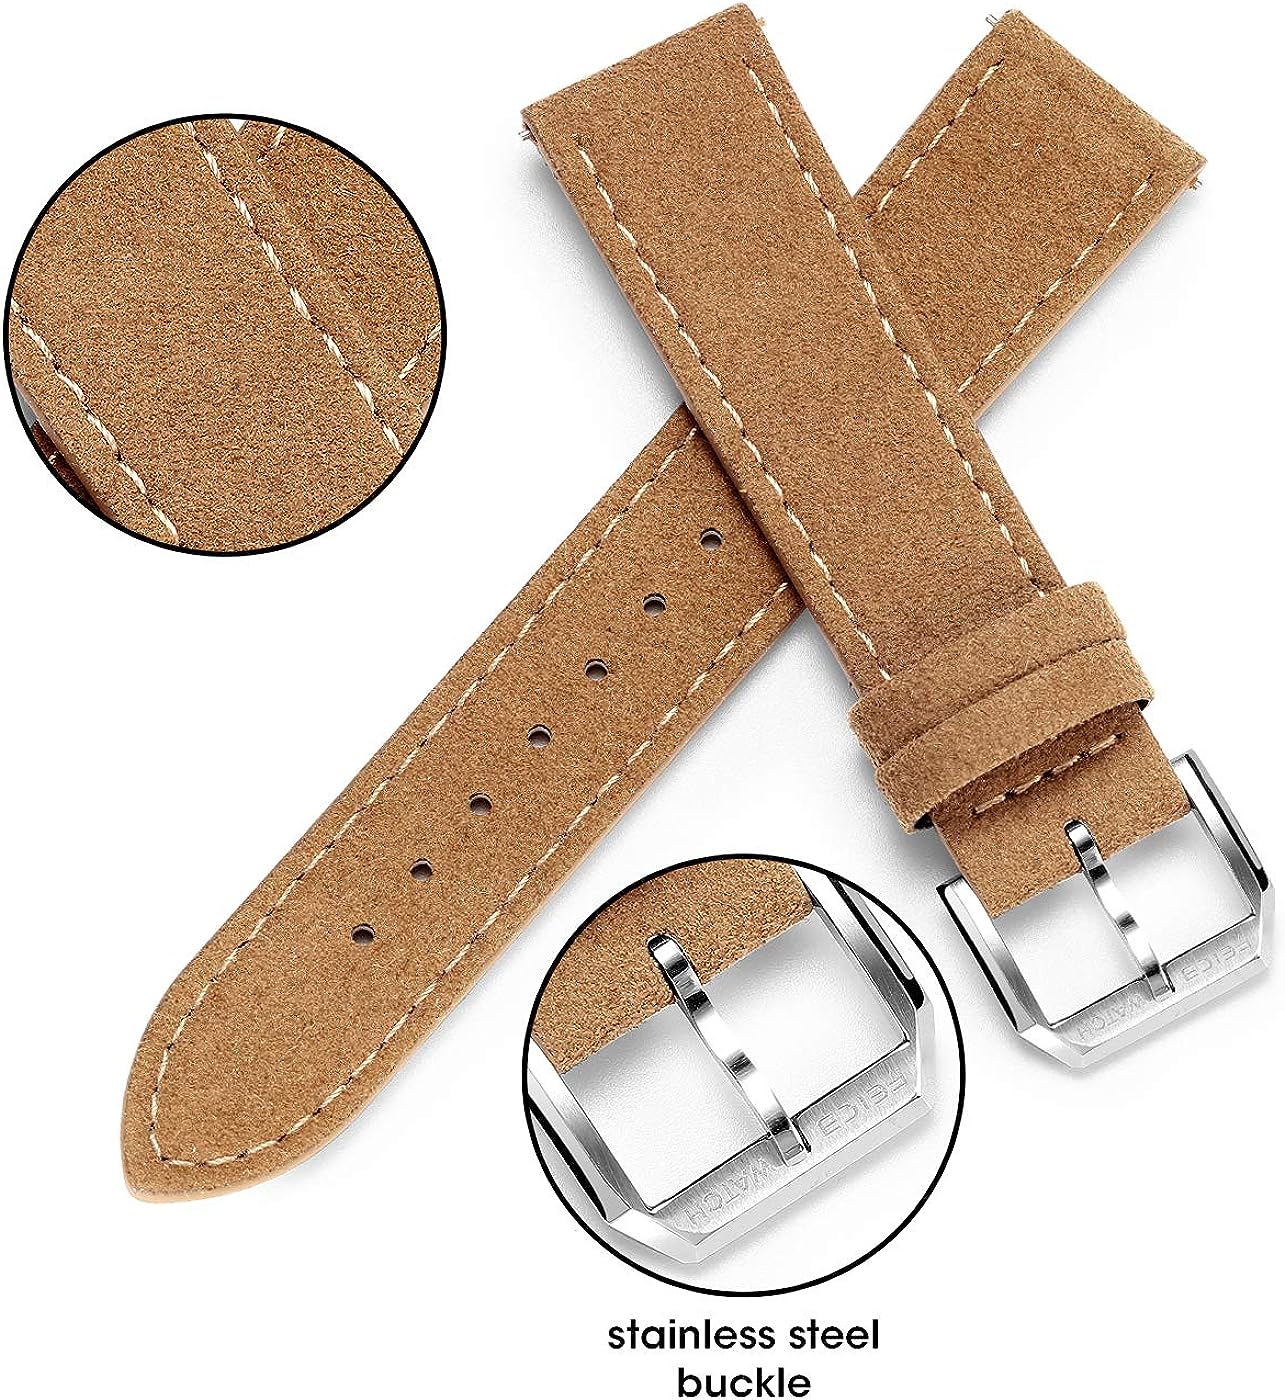 FEICE Brown Genuine Leather Watch Band Calfskin Watch Strap for Men -20mm